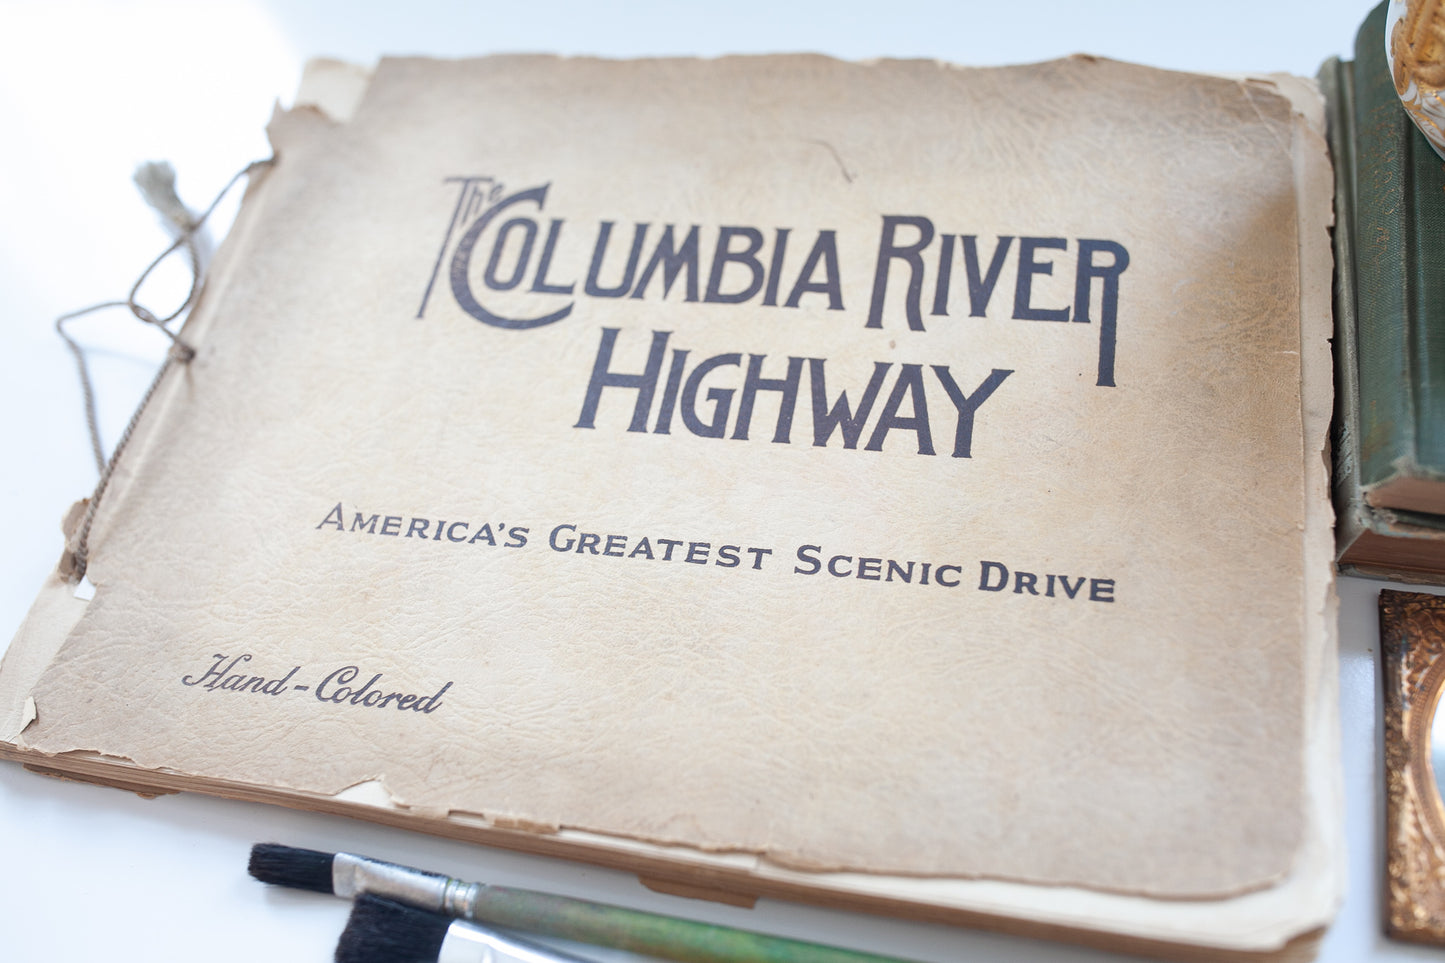 The Columbia River Highway: America's Greatest Scenic Drive by Cross & Dimmitt -Hand Colored Landscape Art- Book -Scenic Drive